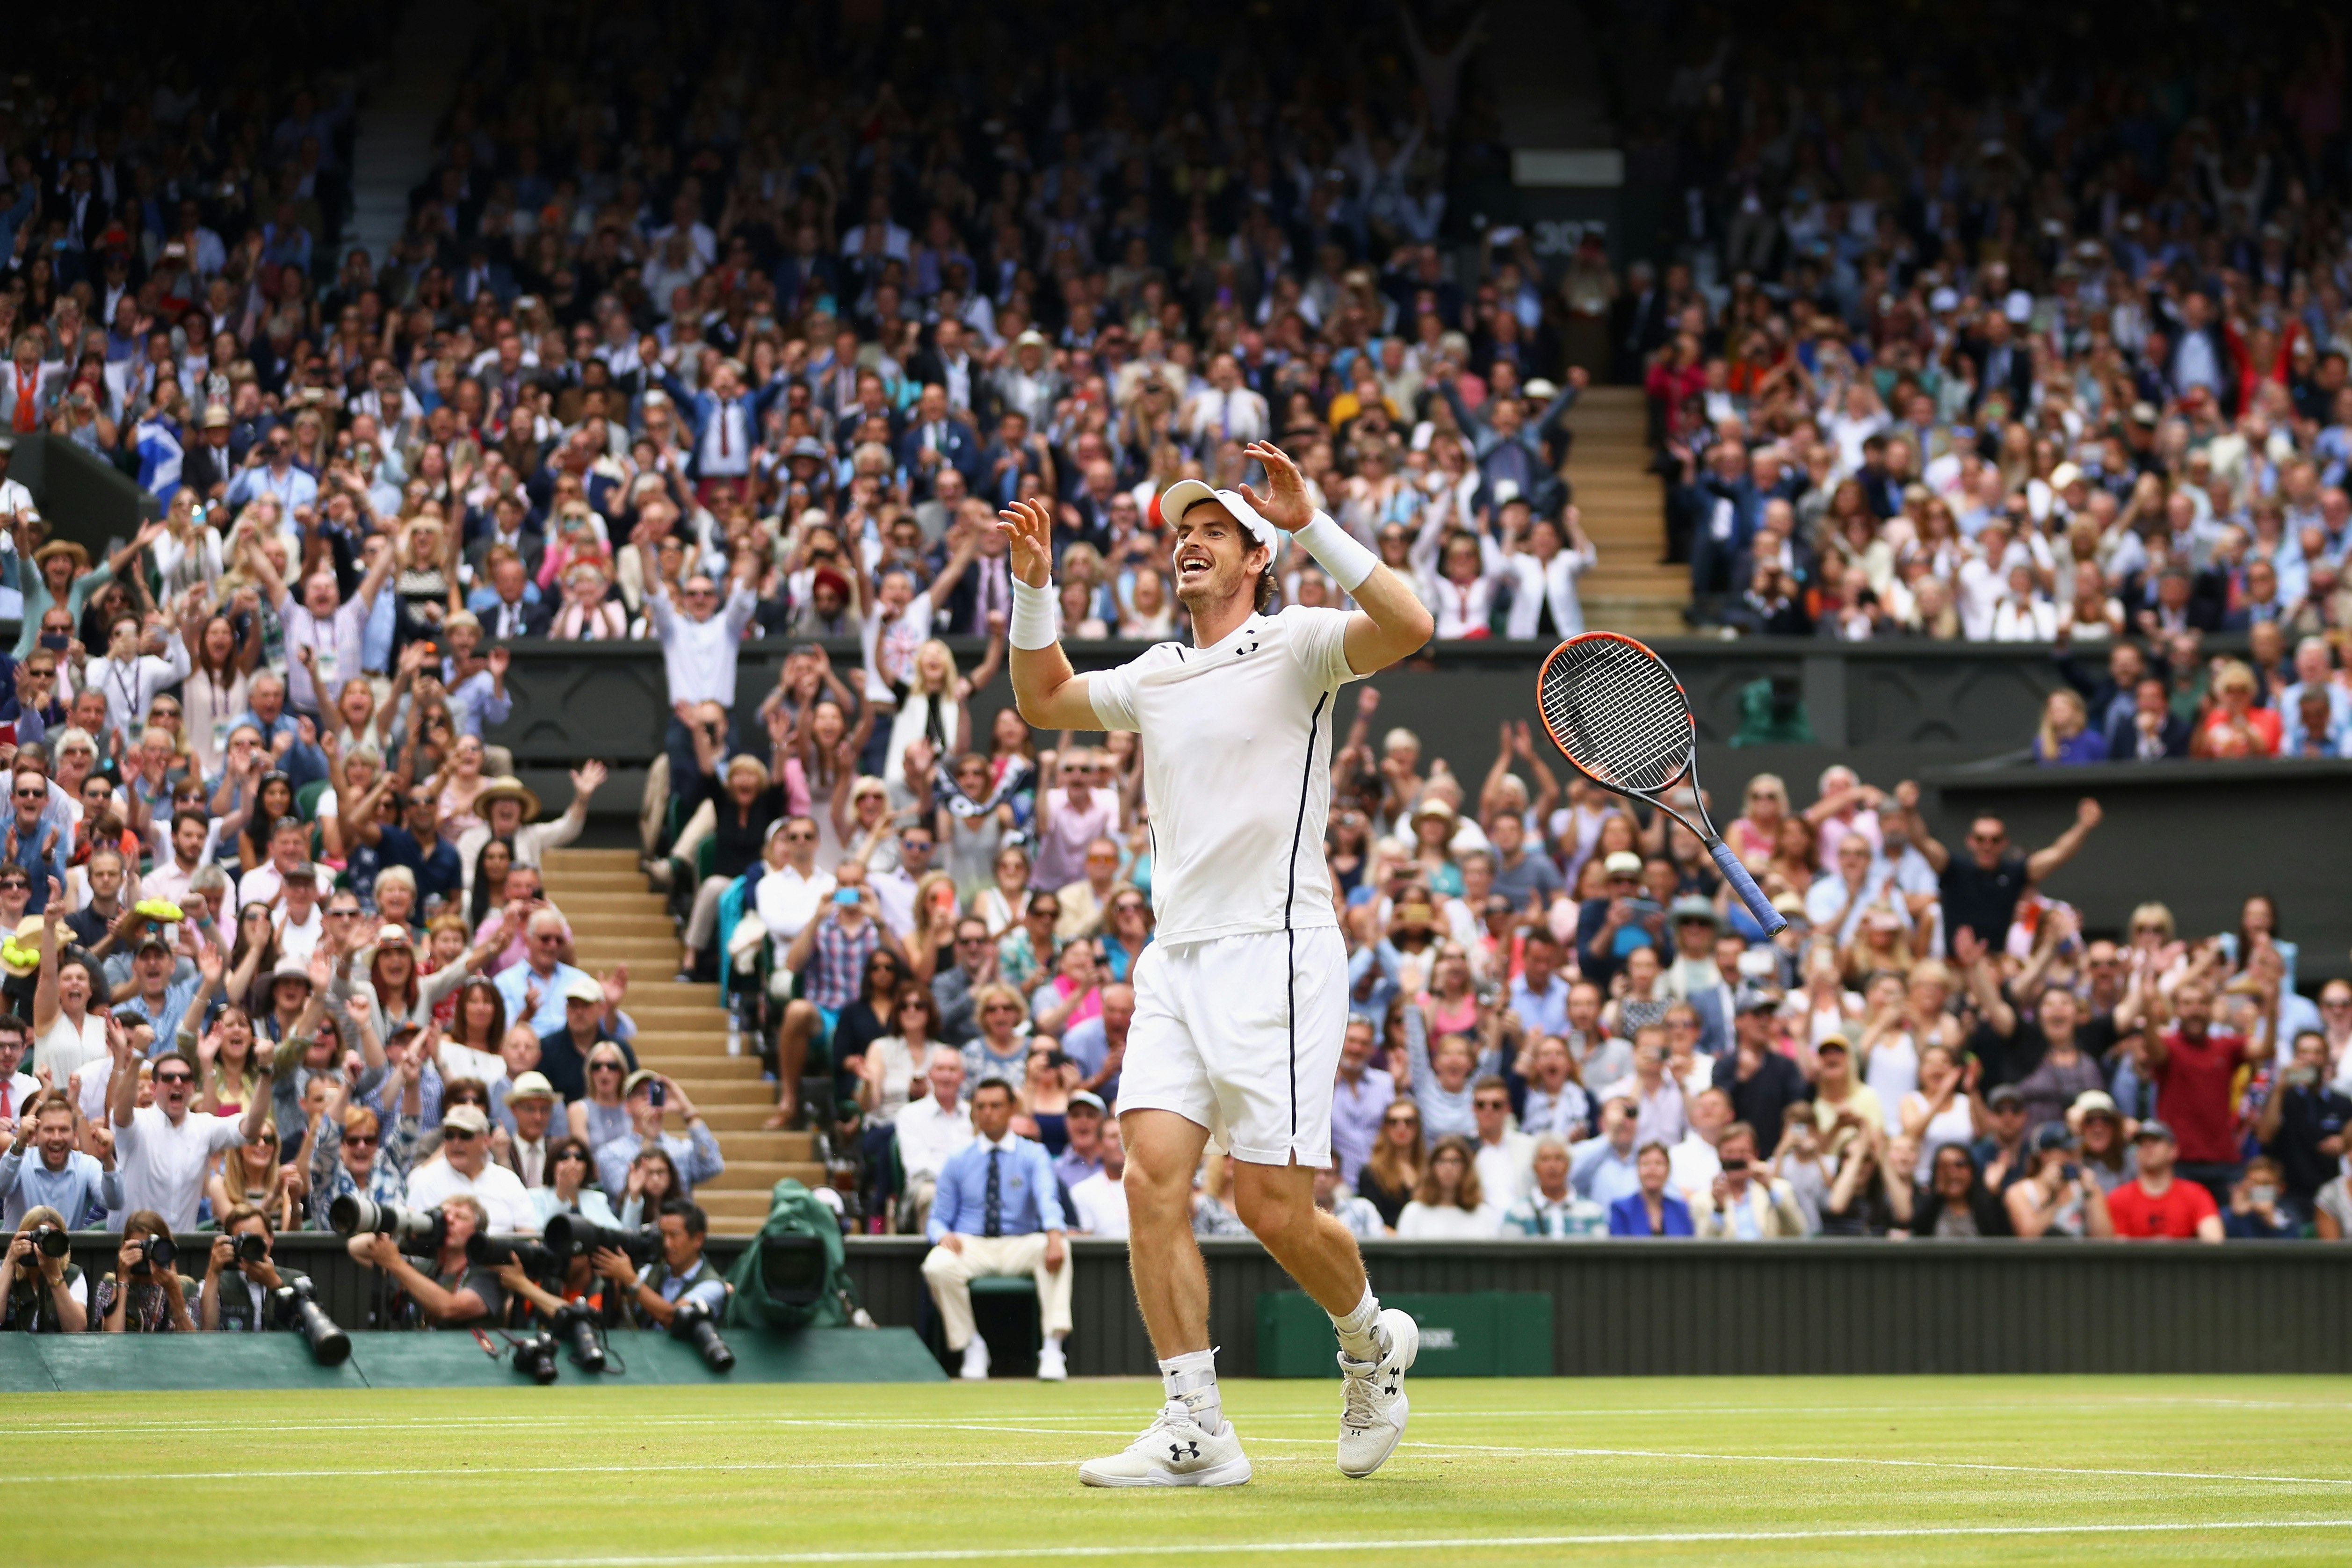 Tennis player Andy Murray celebrates at Centre Court during a Wimbledon Final. Rows of fans cheer in the background. 